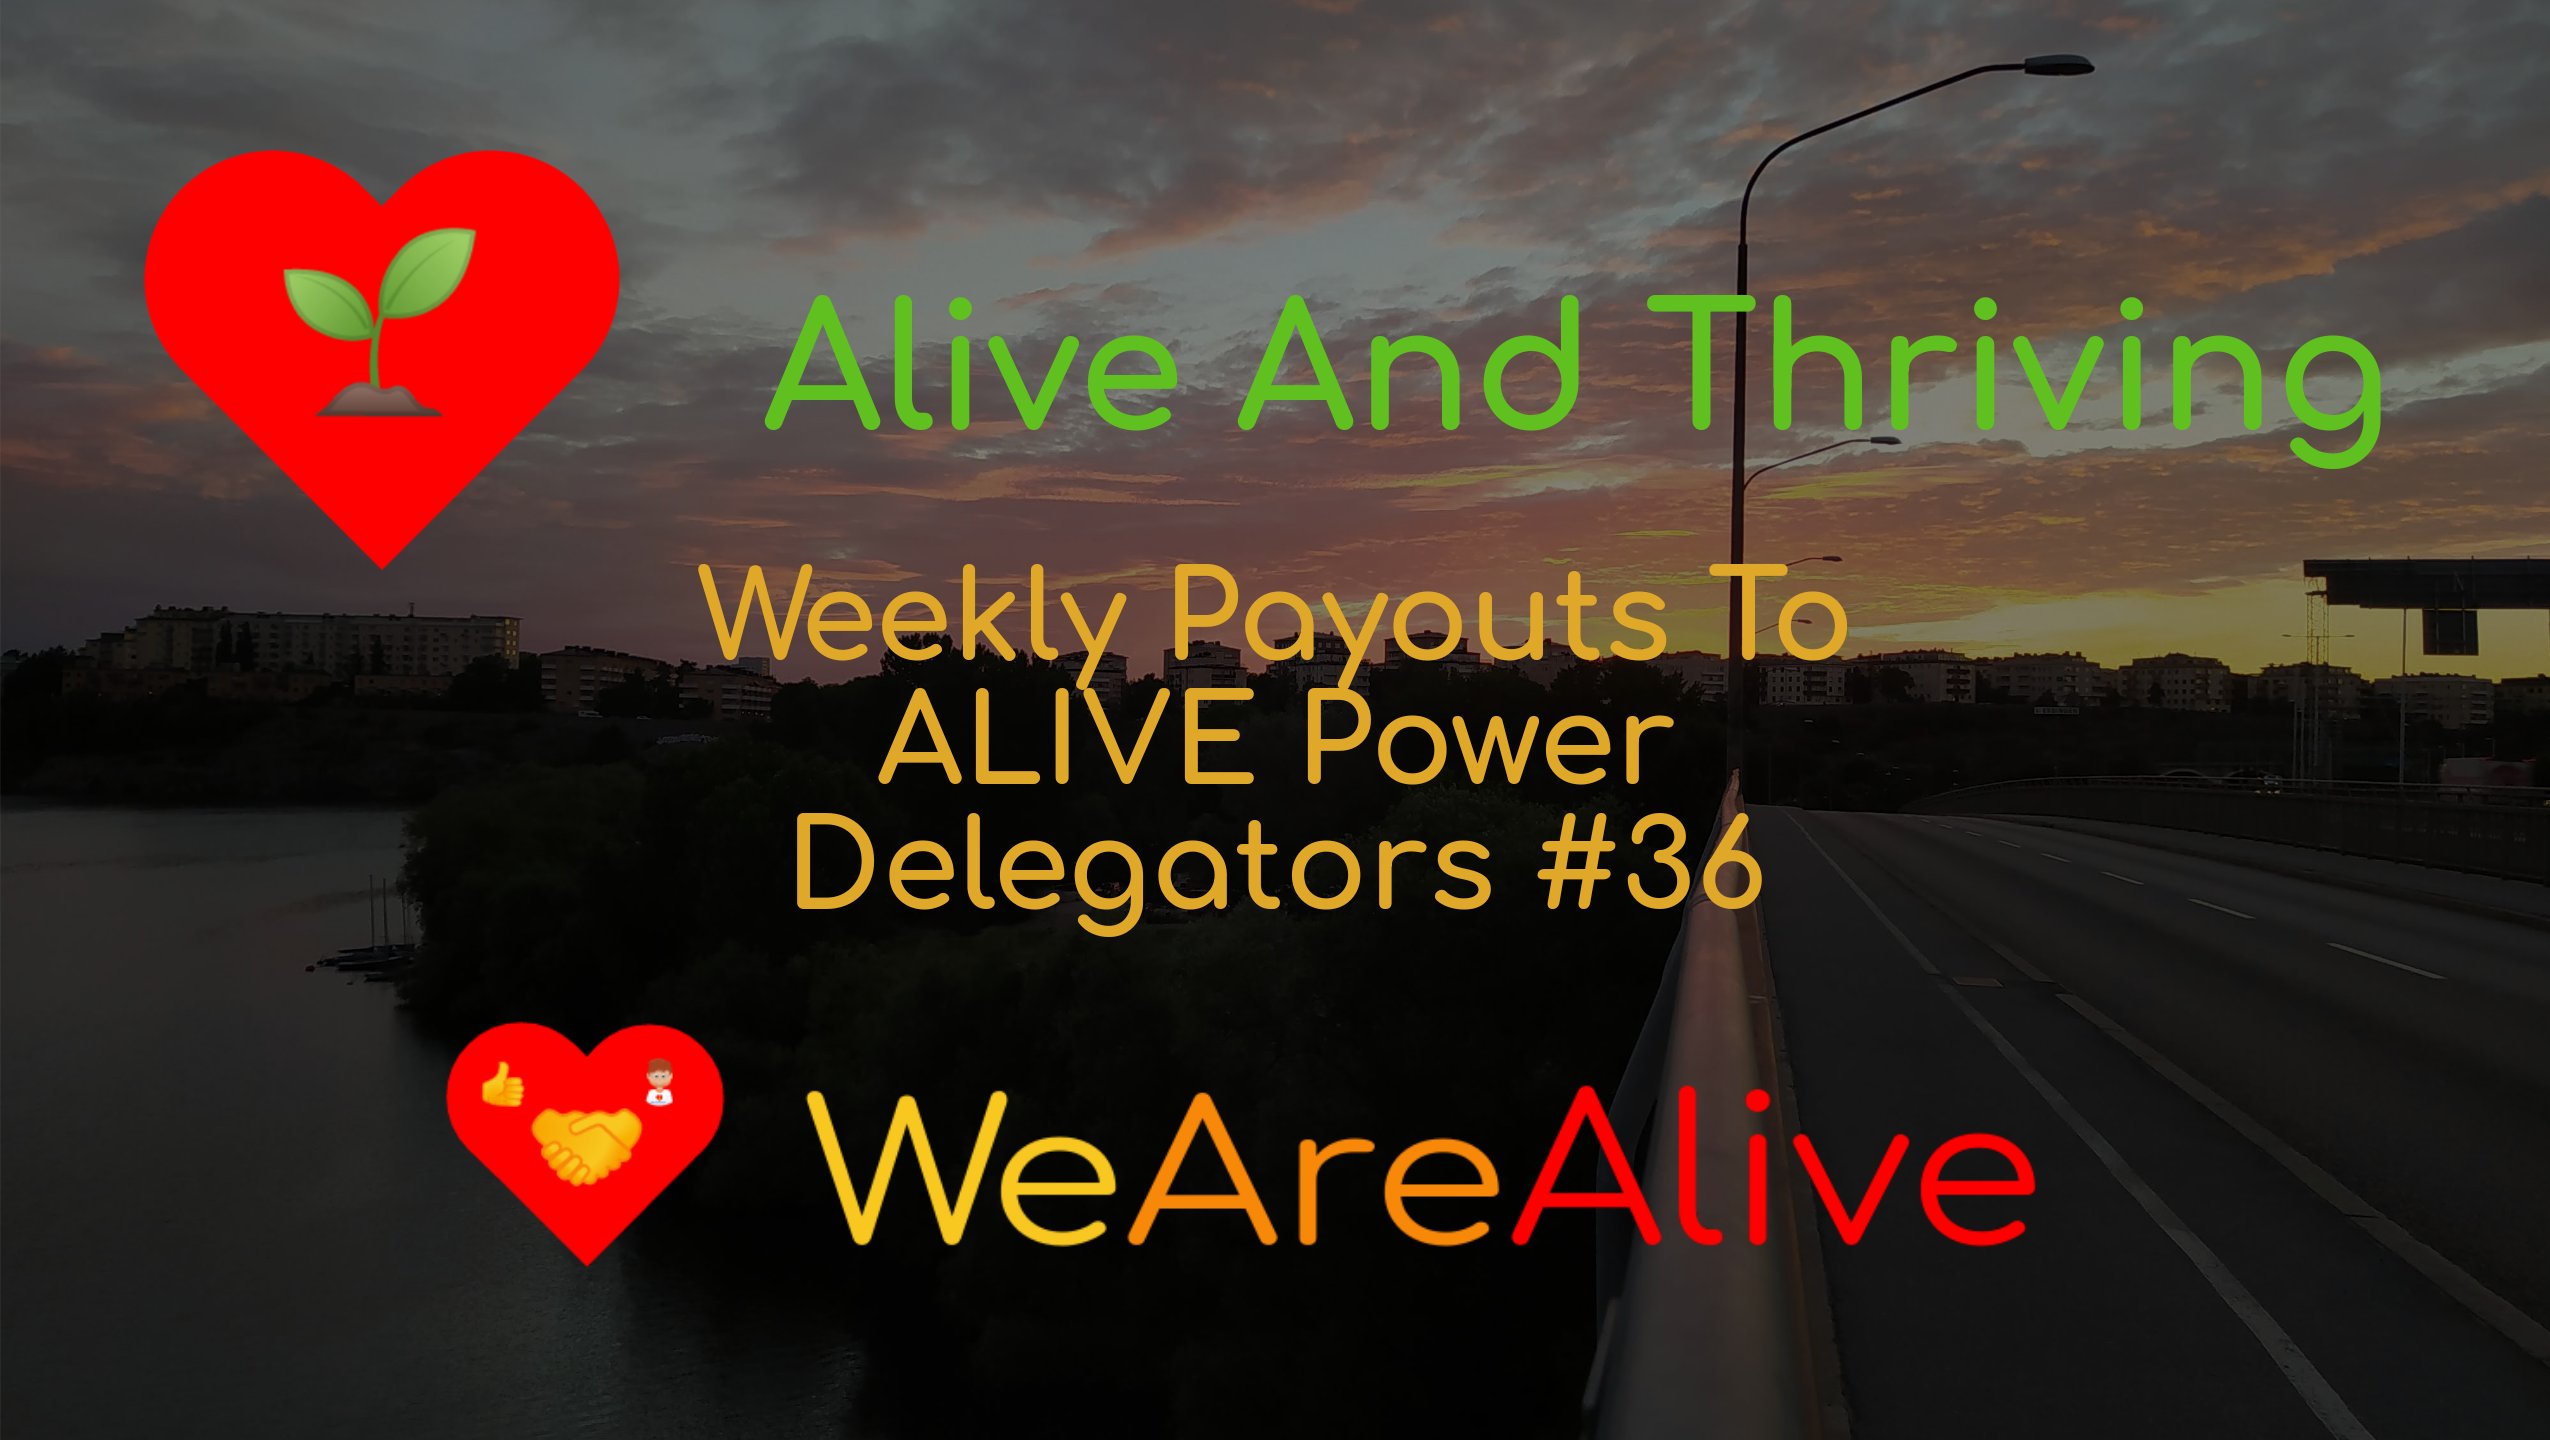 @wearealive/alive-and-thriving-weekly-payouts-to-alive-power-delegators-36